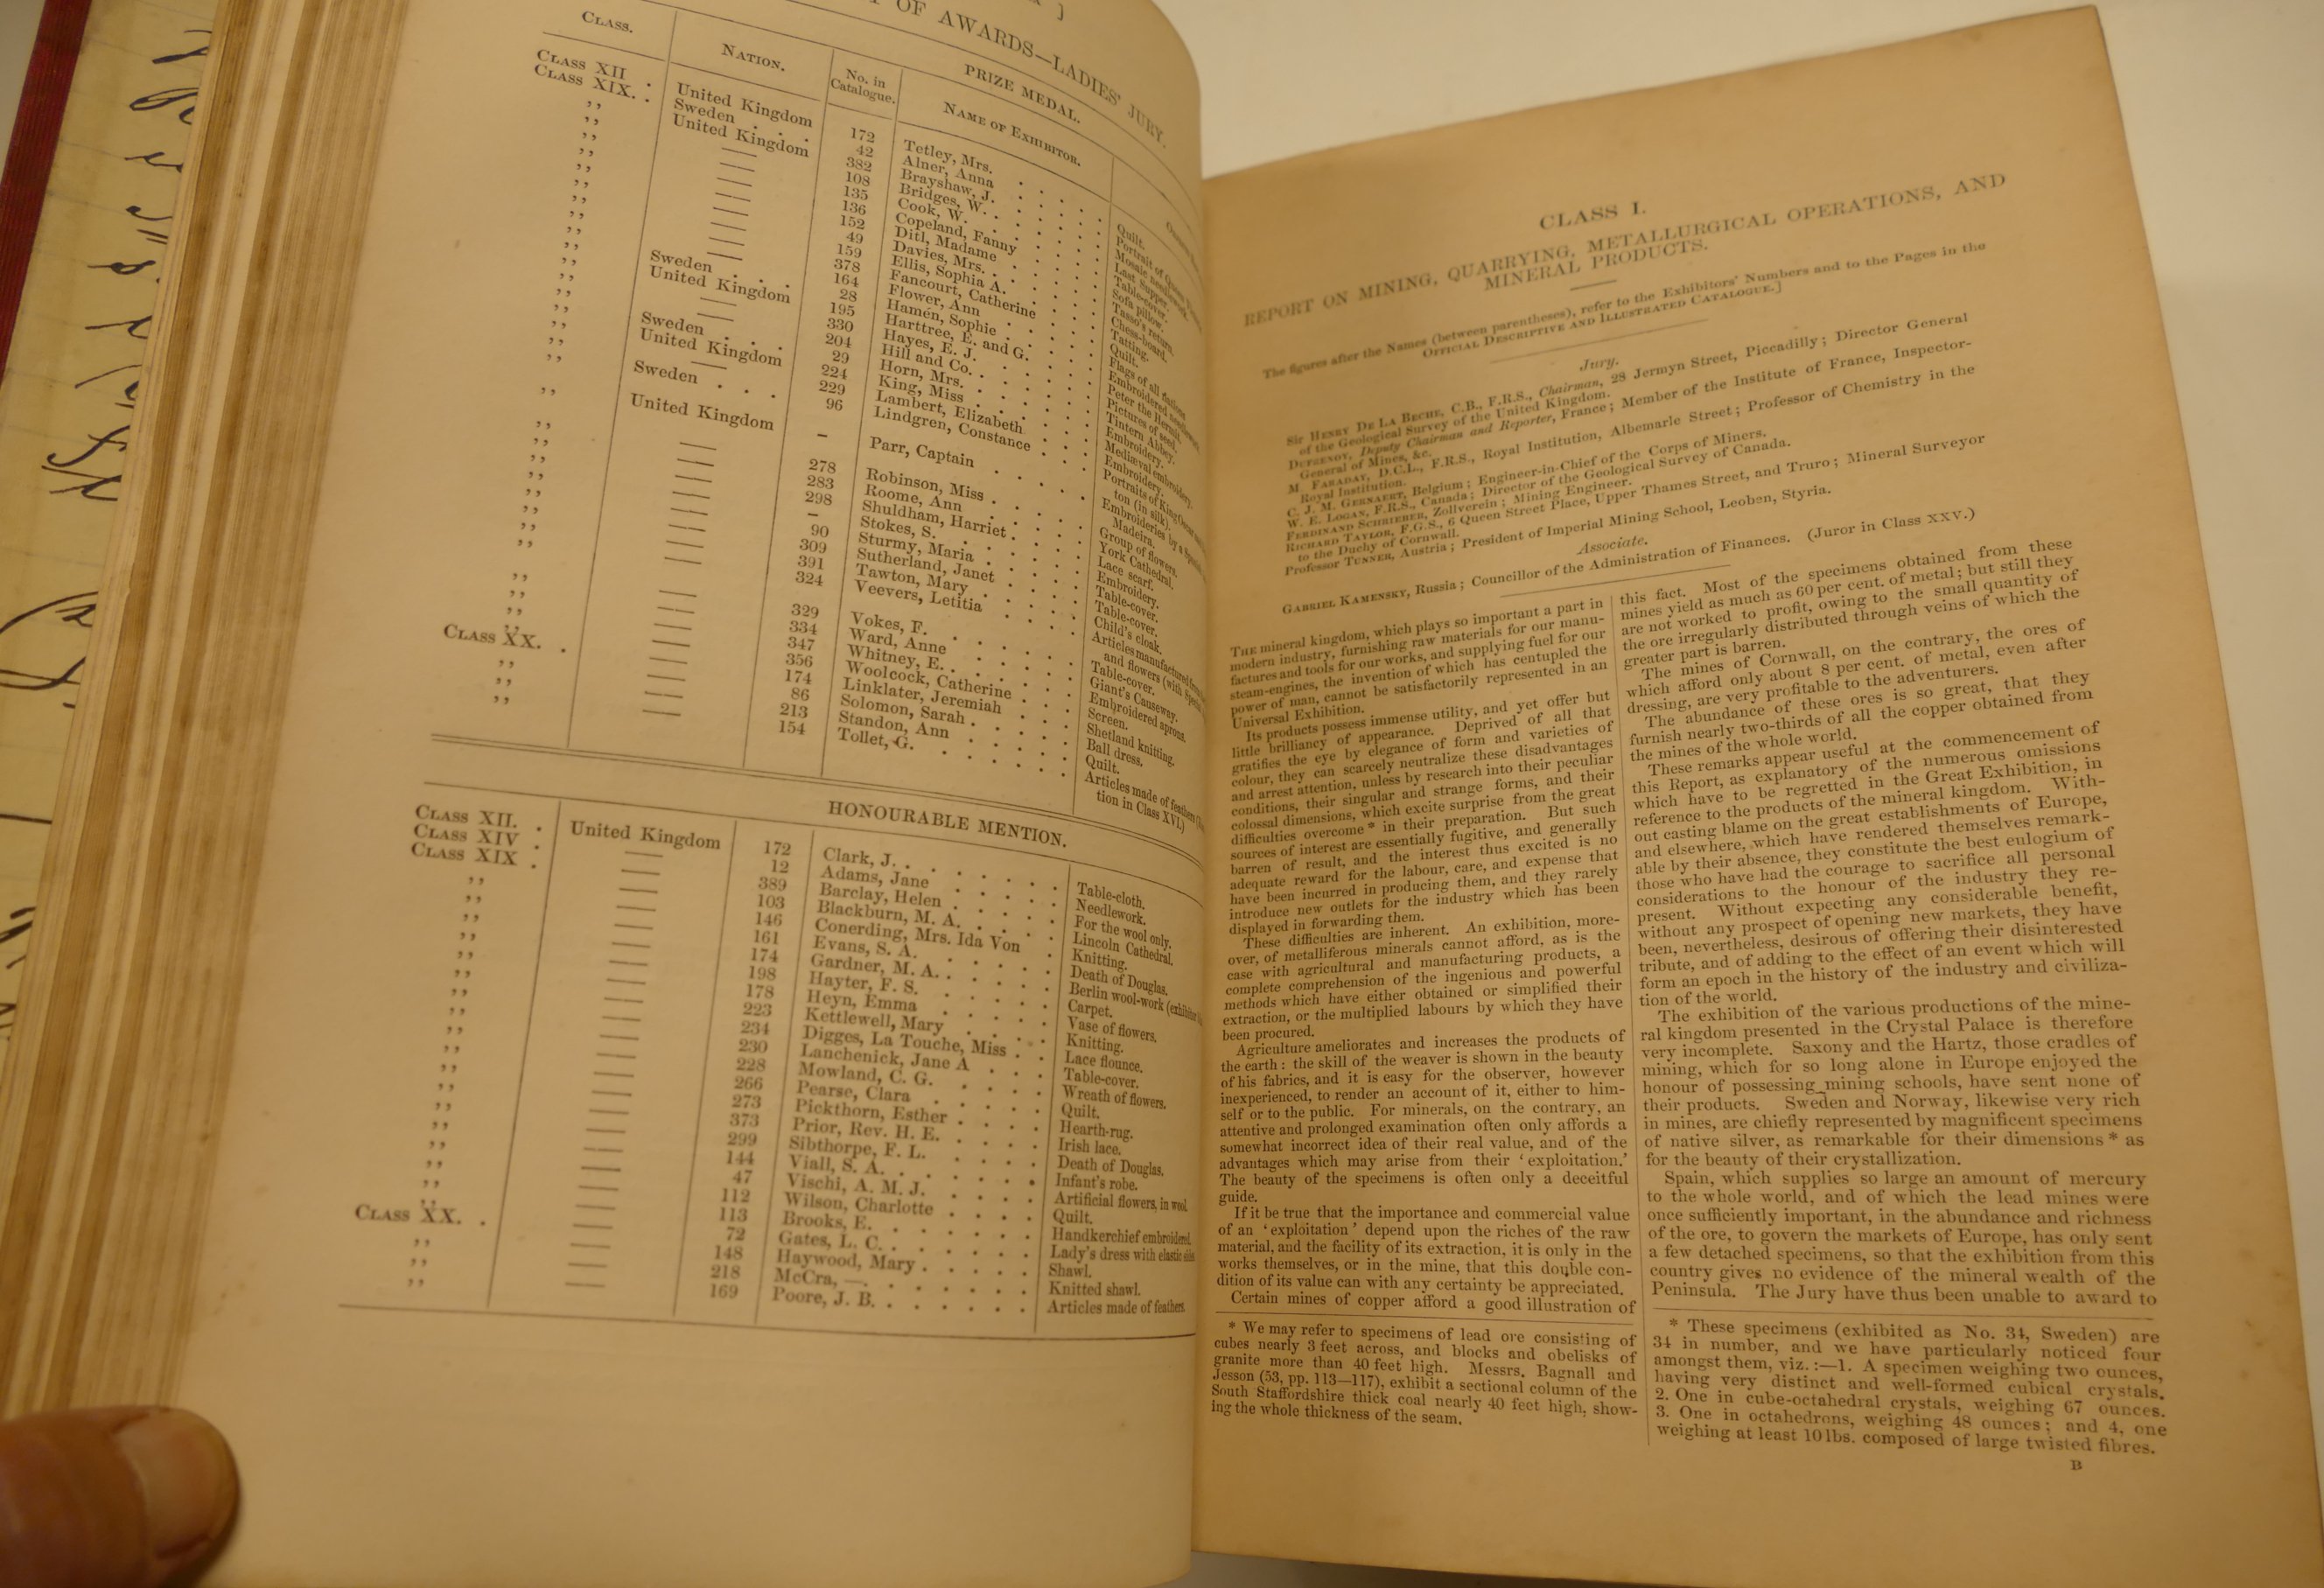 Exhibition of the Works of Industry of All Nations 1851, Reports by the Juries... - Image 4 of 4